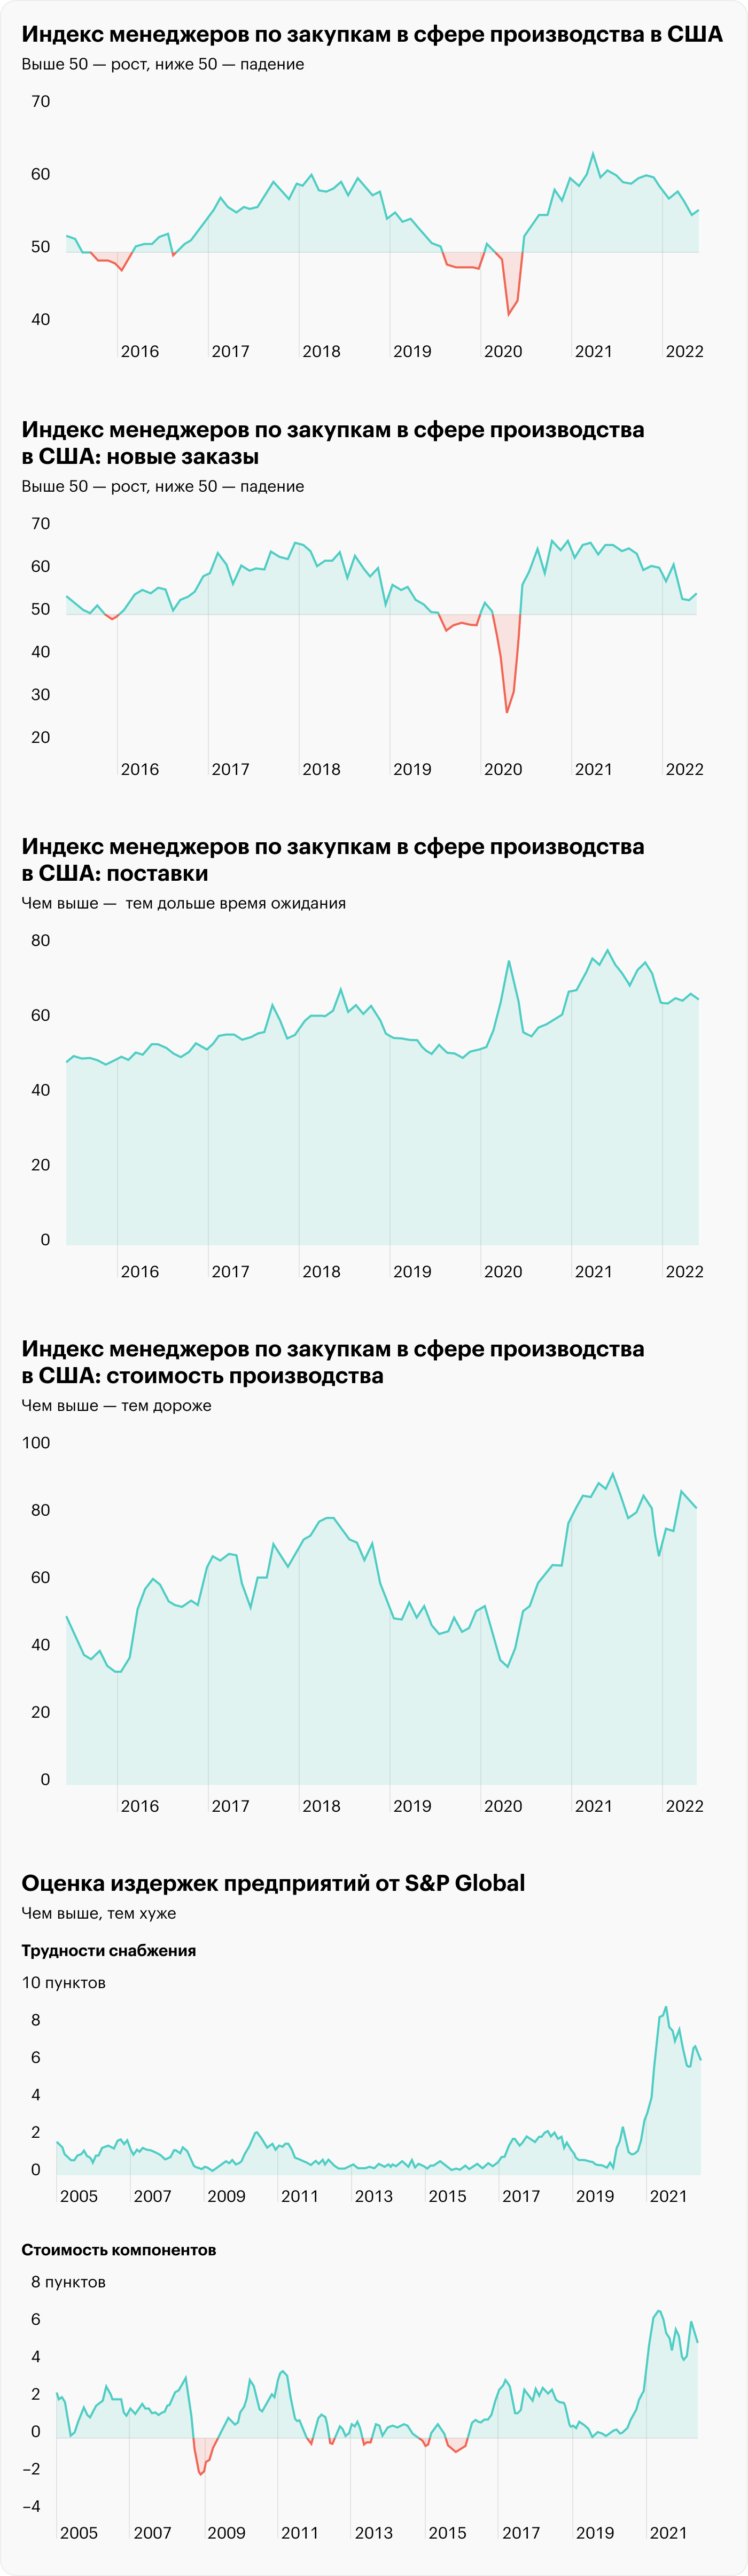 Источник: Daily Shot, ISM Manufacturing PMI, New orders unexpectedly strengthened, The index of supplier delivery times, Price pressures remain elevated, Commodity supply and price pressures